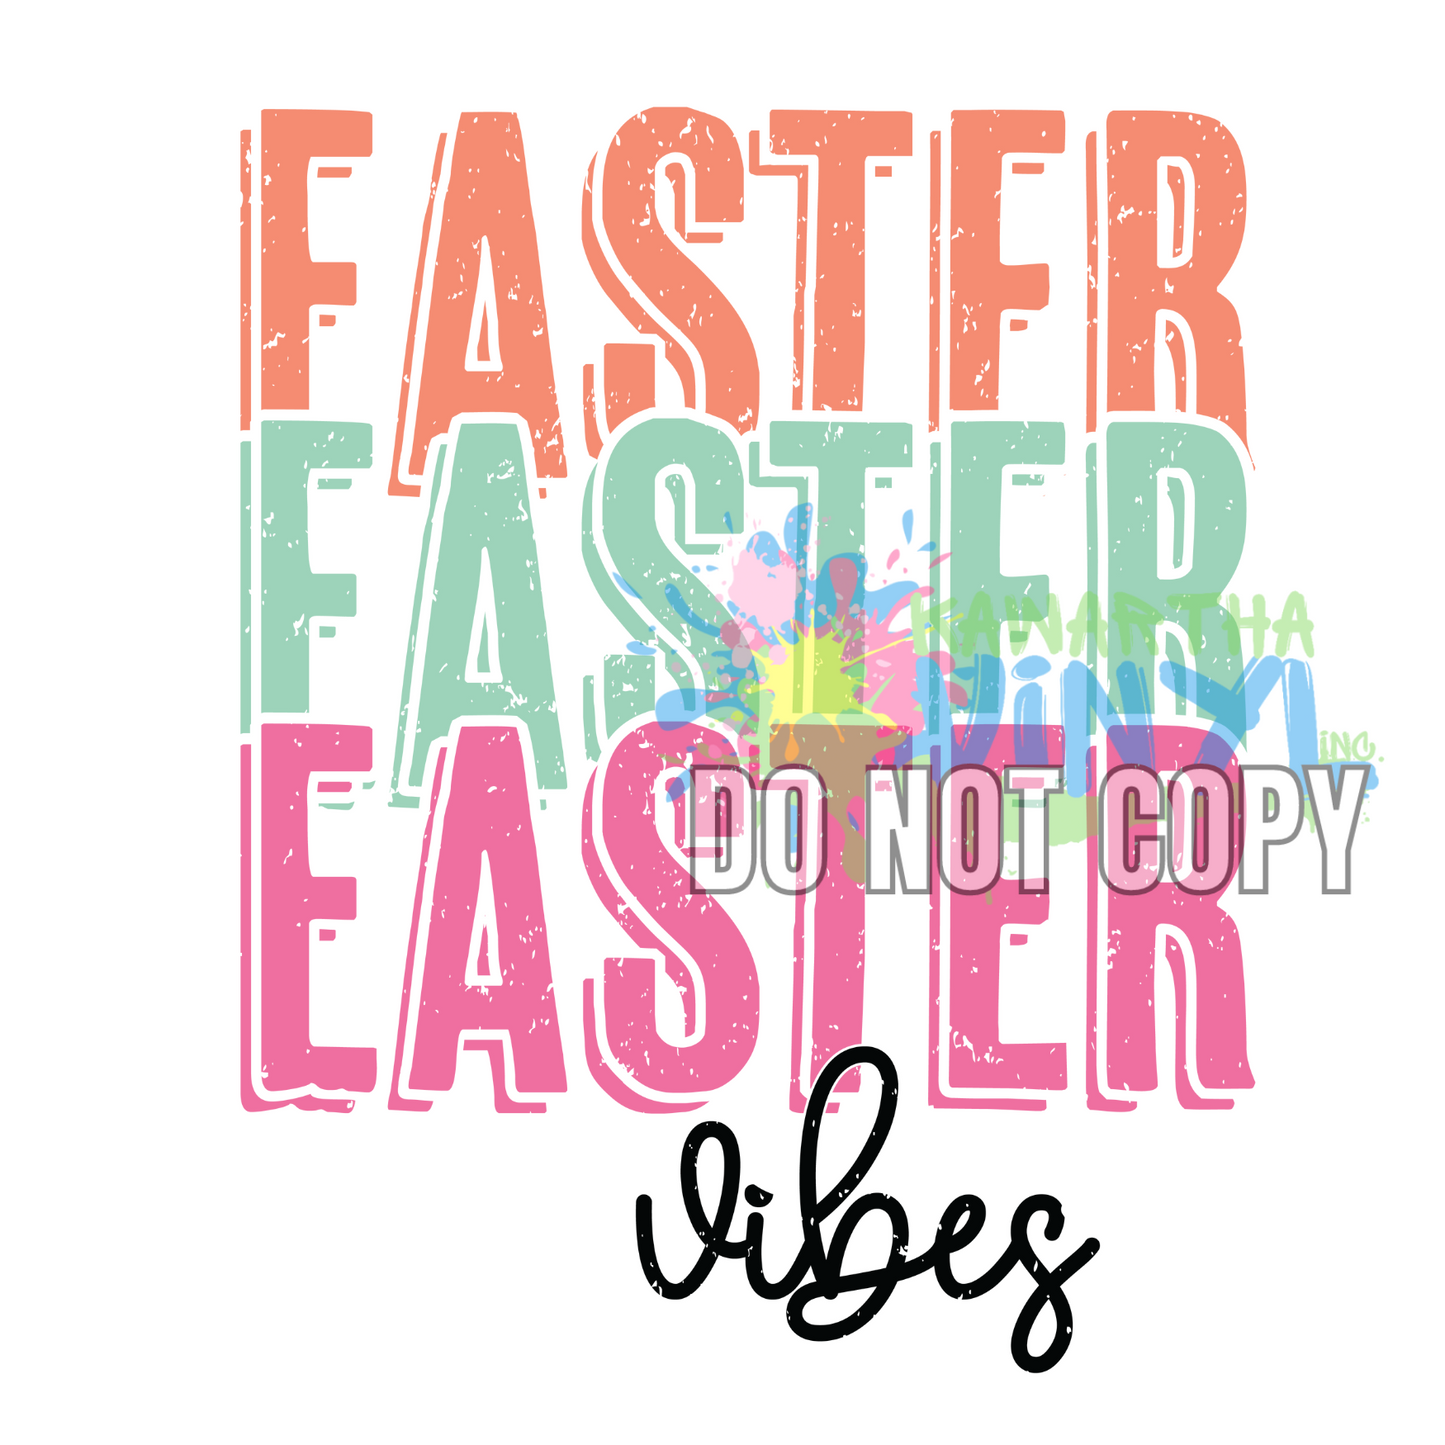 Easter Vibes Retro Grunge Sublimation Print